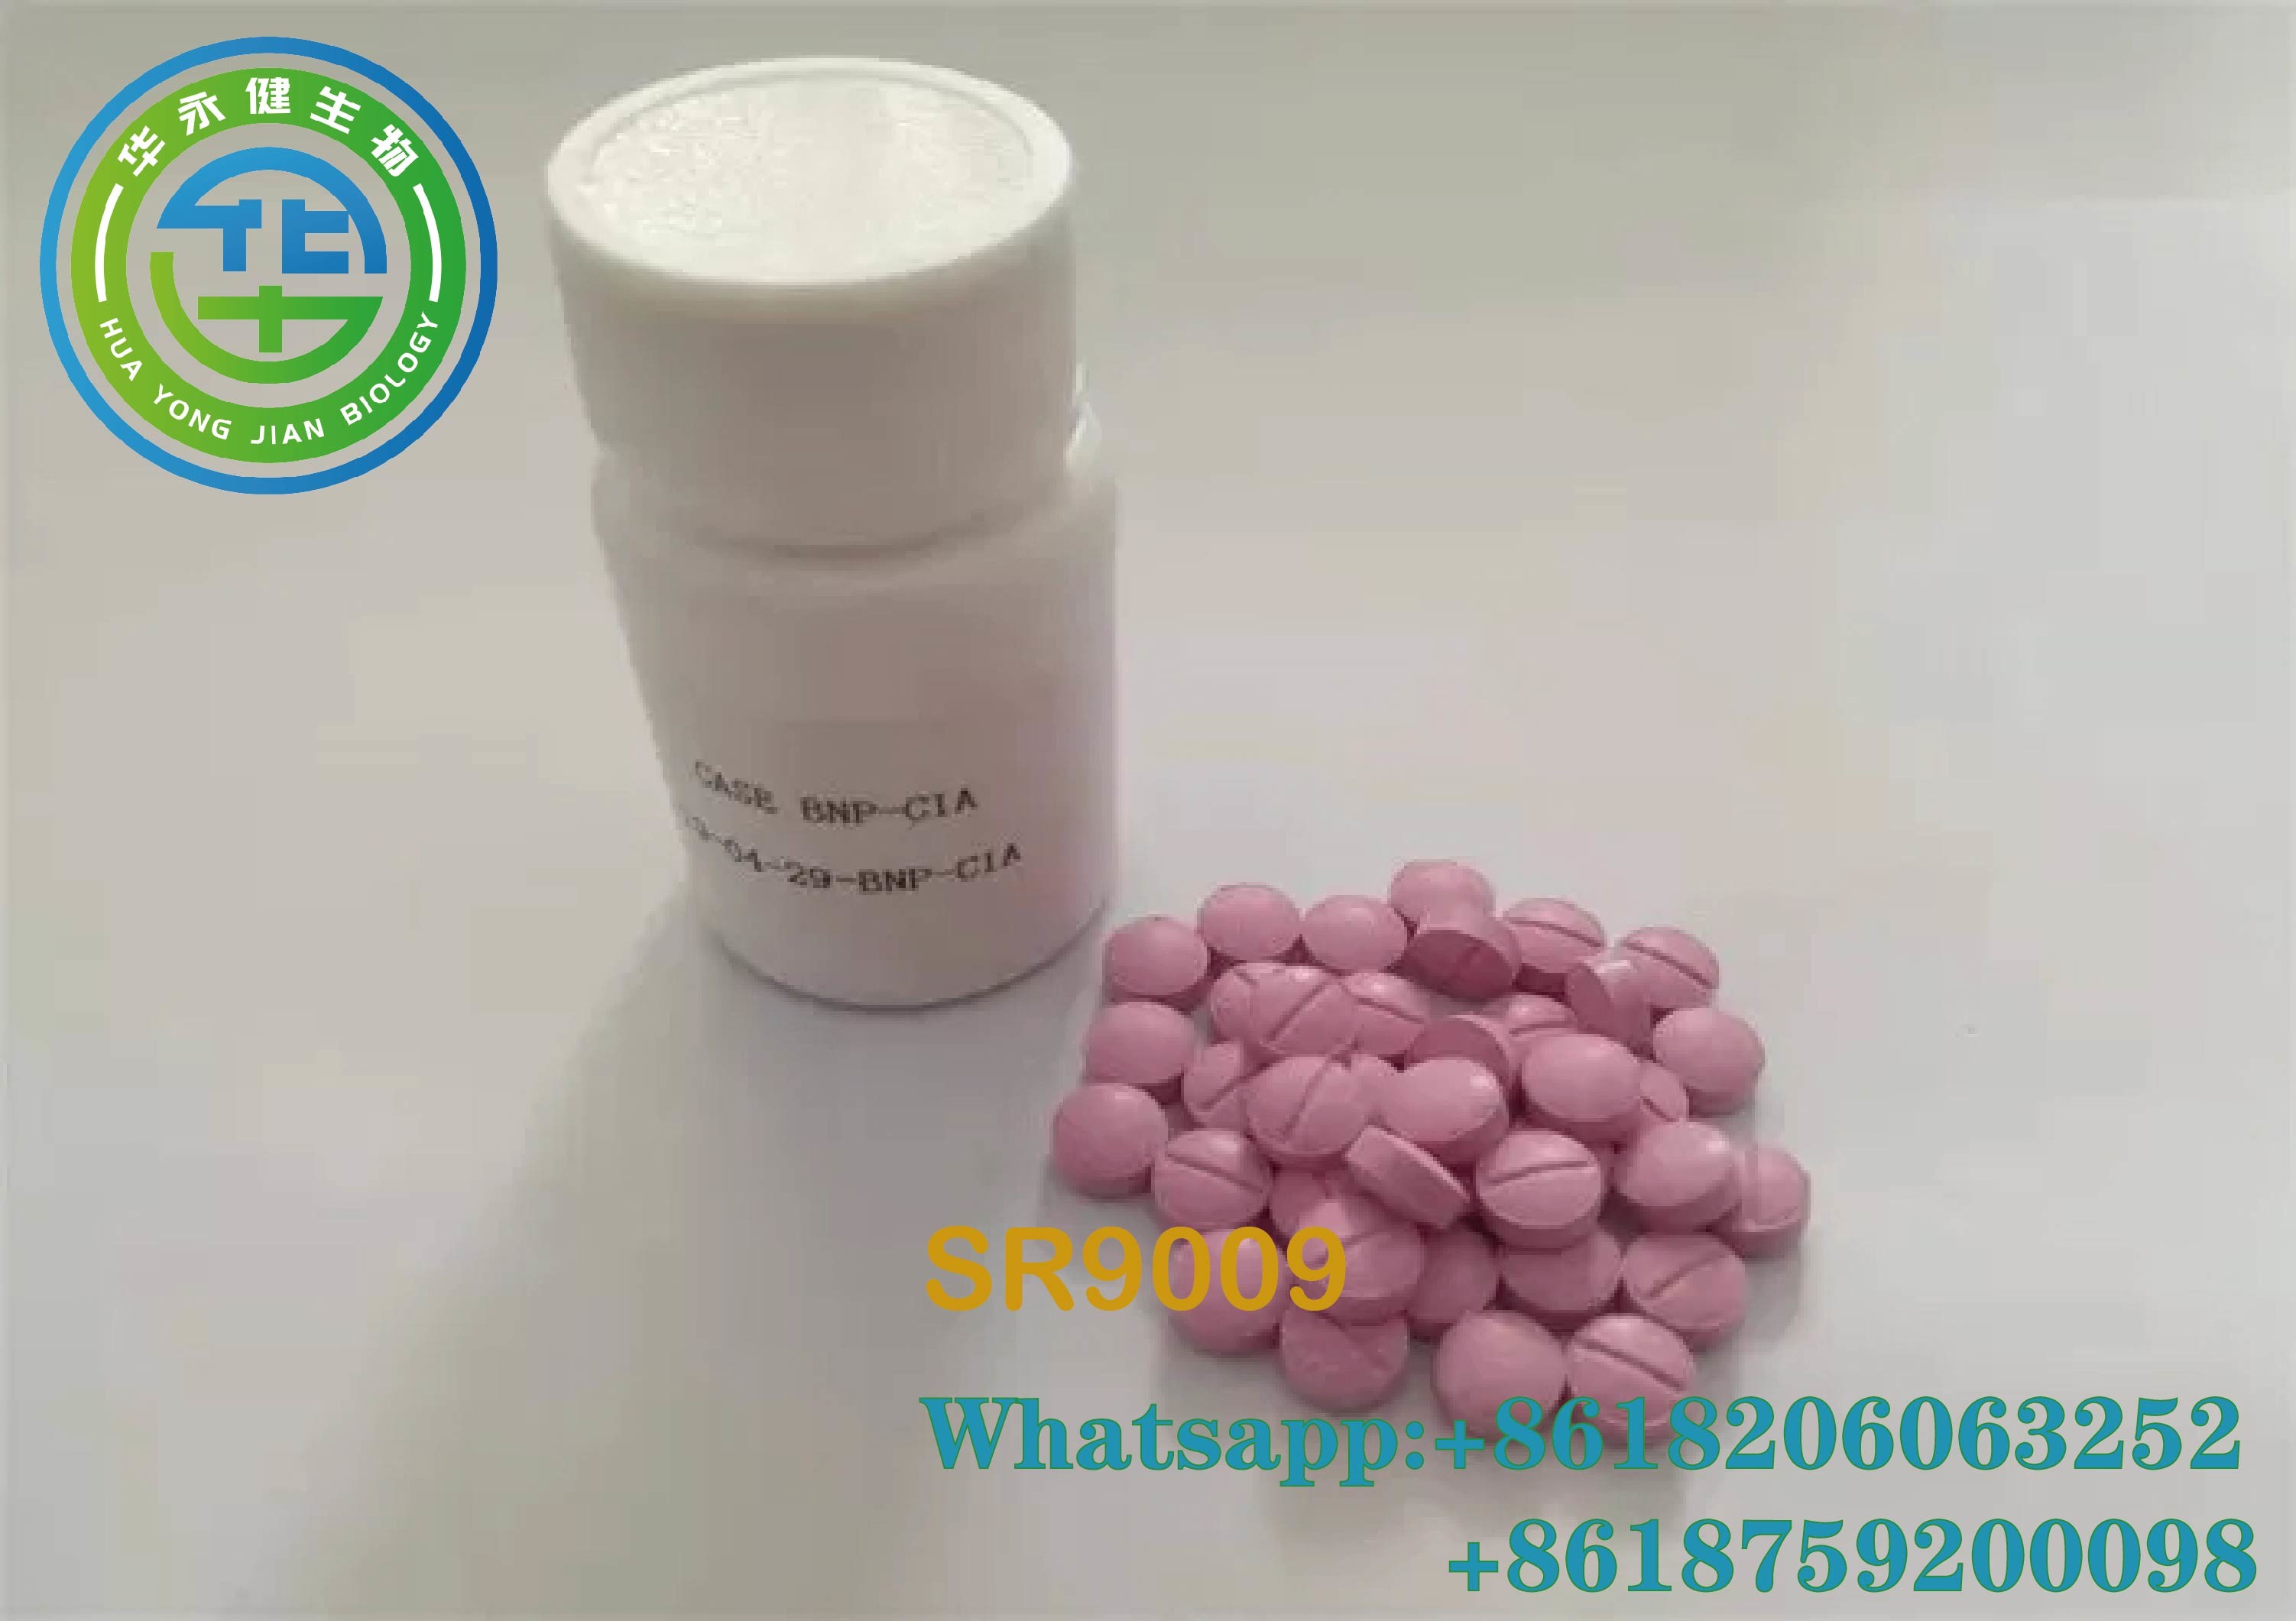 Wholesale Legal Sr9009 Sarms Tablets Stenabolic Bulking  Mass Increasing Endurance  Cas 1379686-30-2 from china suppliers